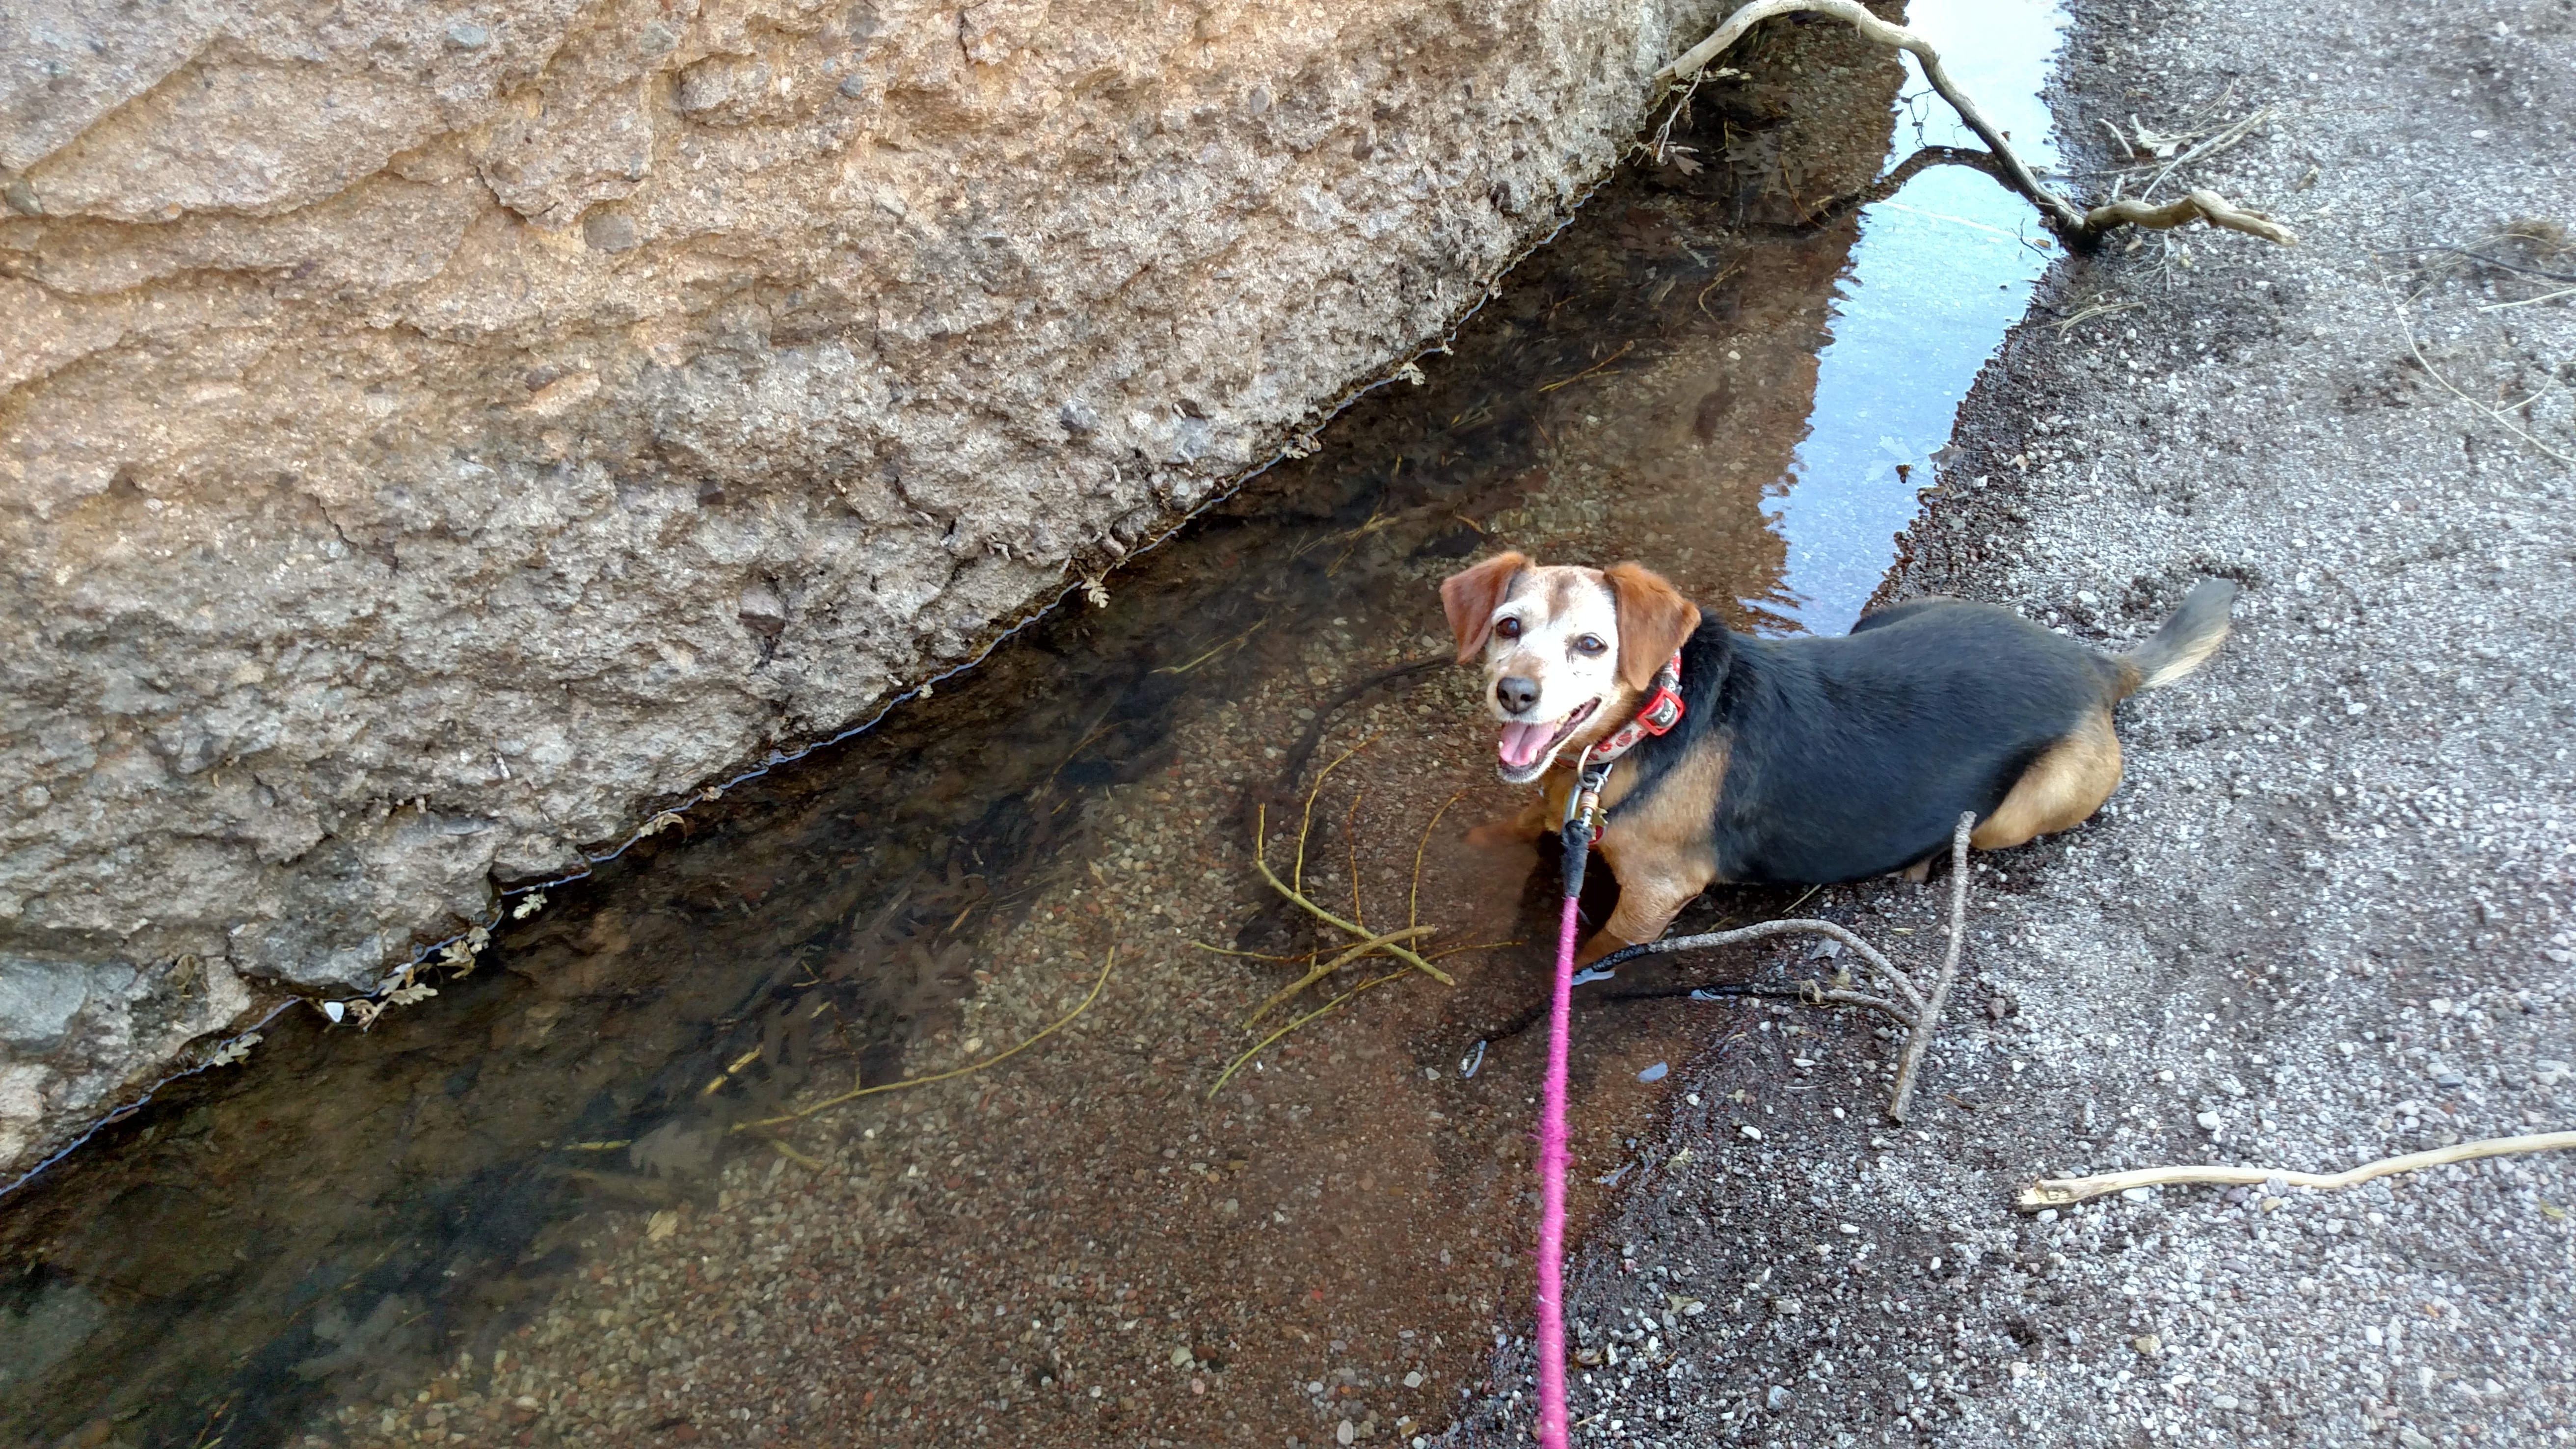 A beagle cools off in a mountain stream in the shade of a boulder